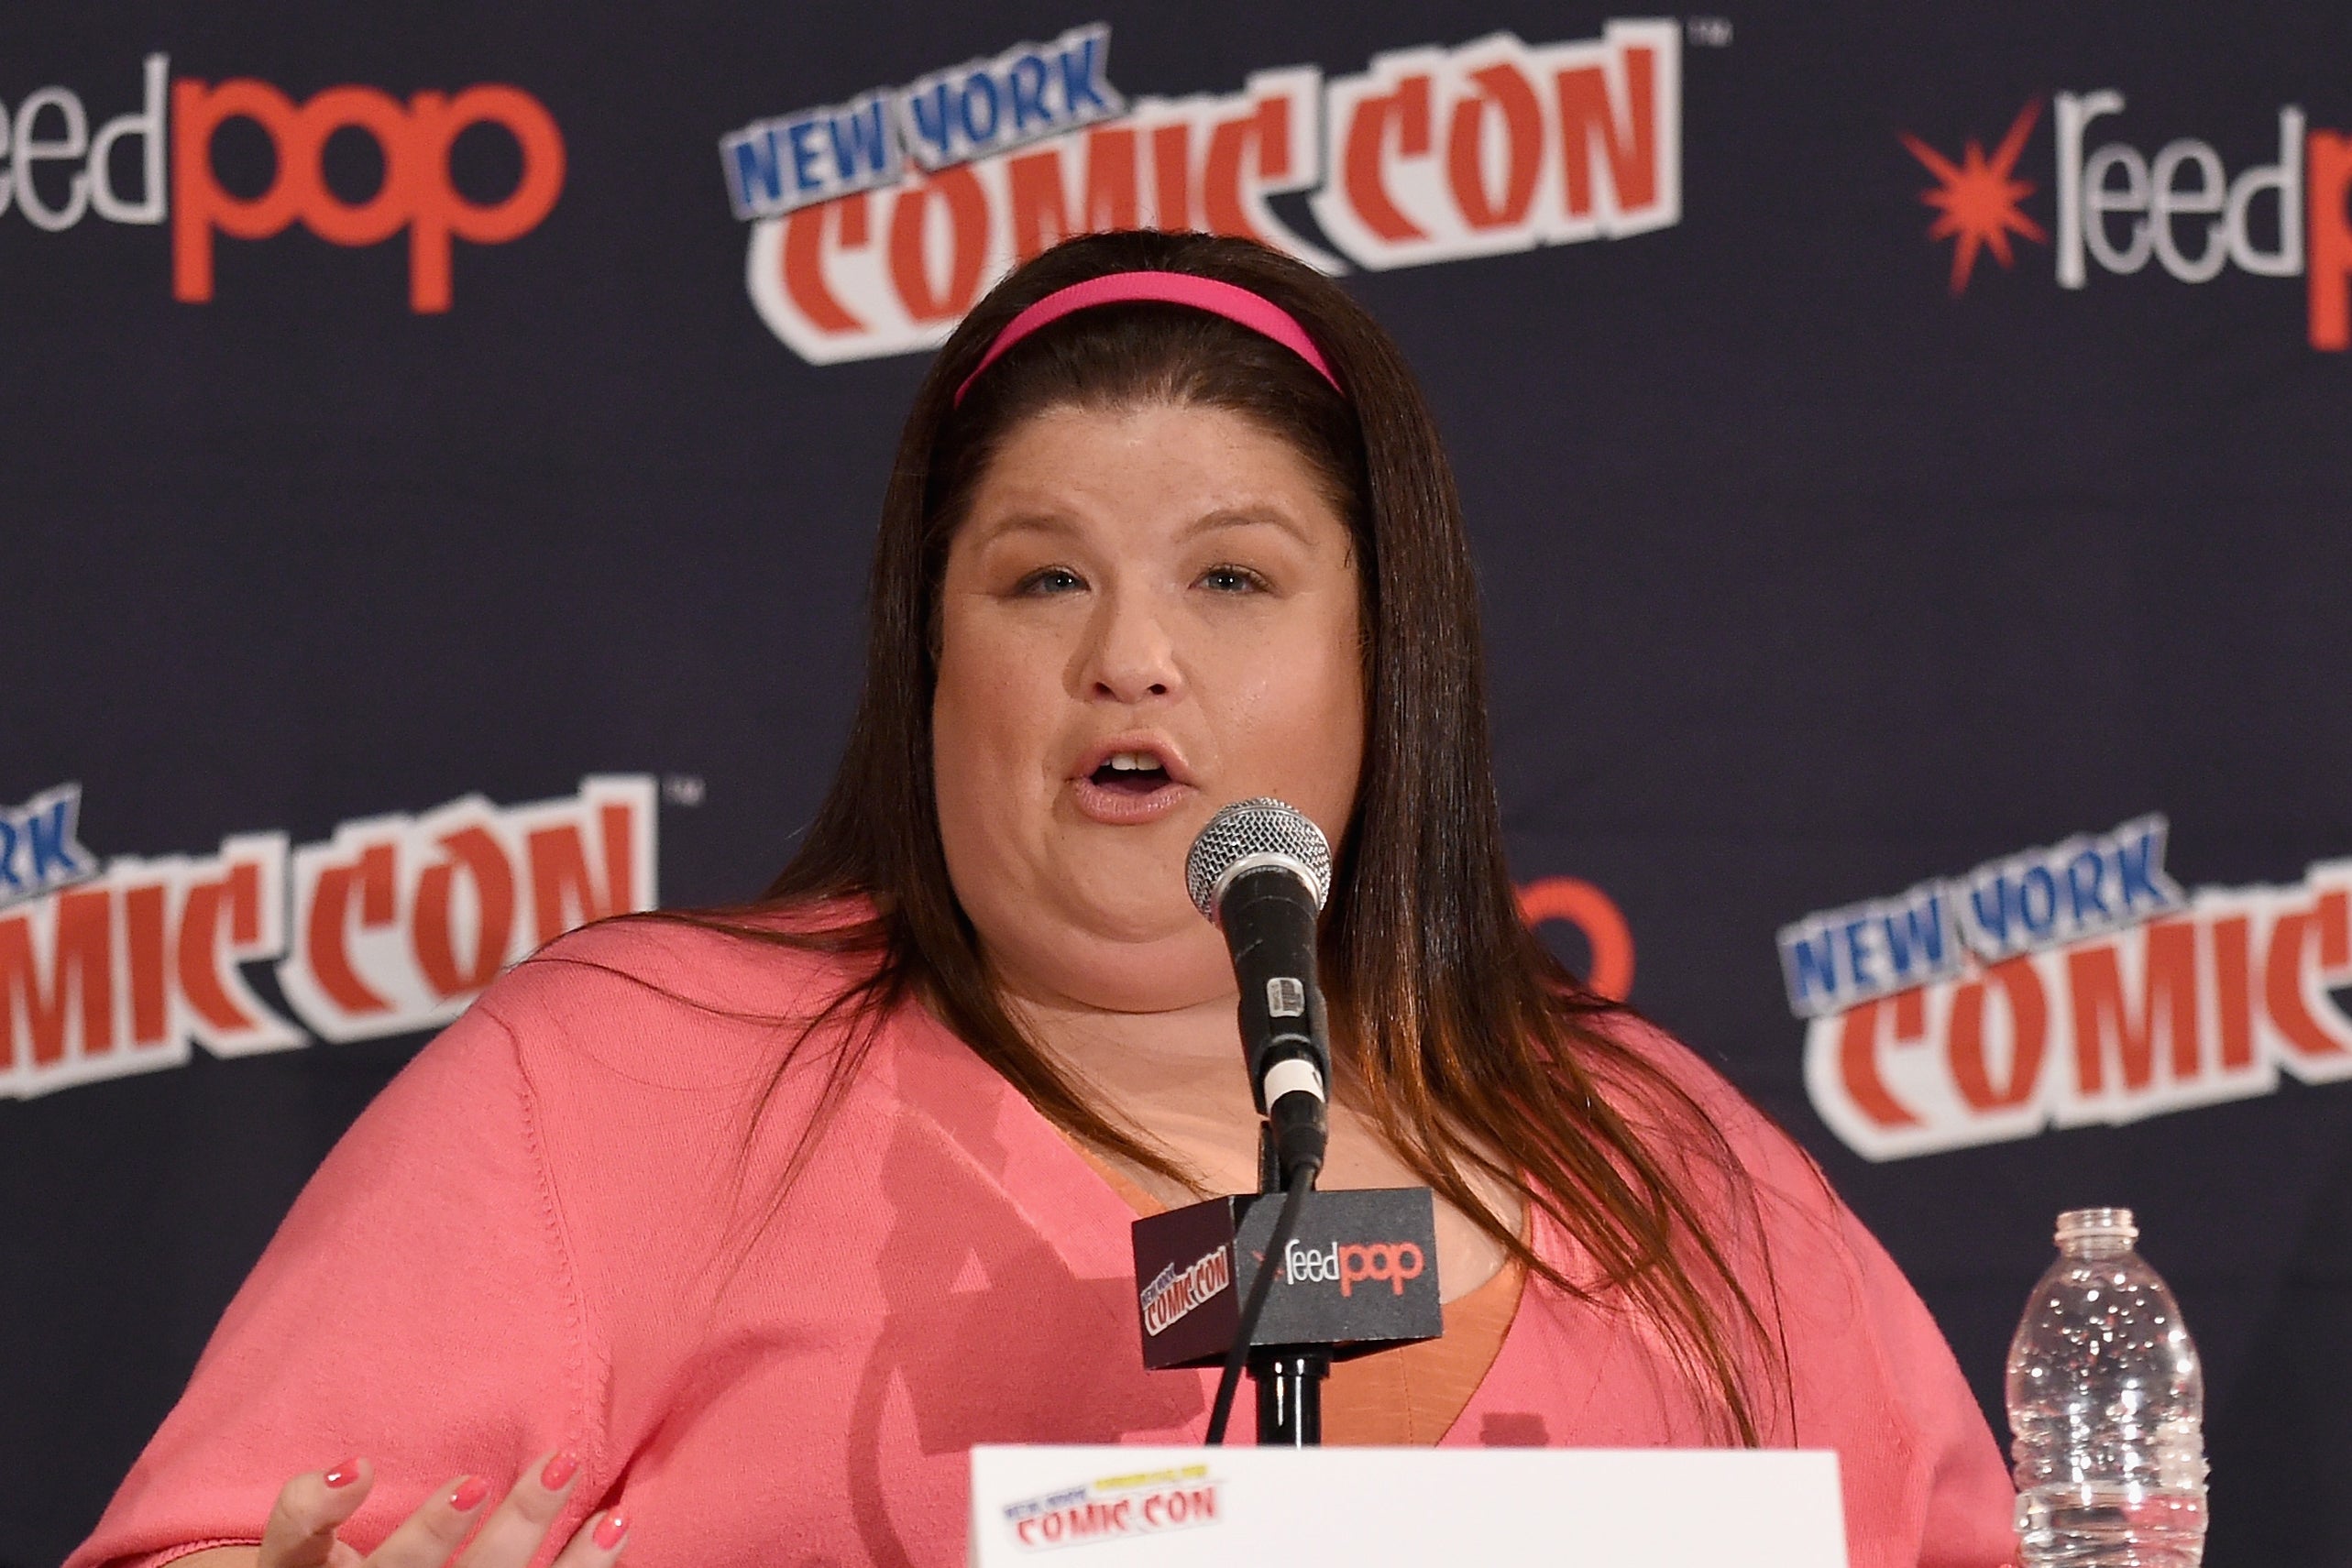 Lori Beth Denberg (pictured in 2015) starred in four seasons of the kids’ sketch comedy series All That from 1994 to 1998. She has accused Nickelodeon producer Dan Schneider of inappropriate behavior